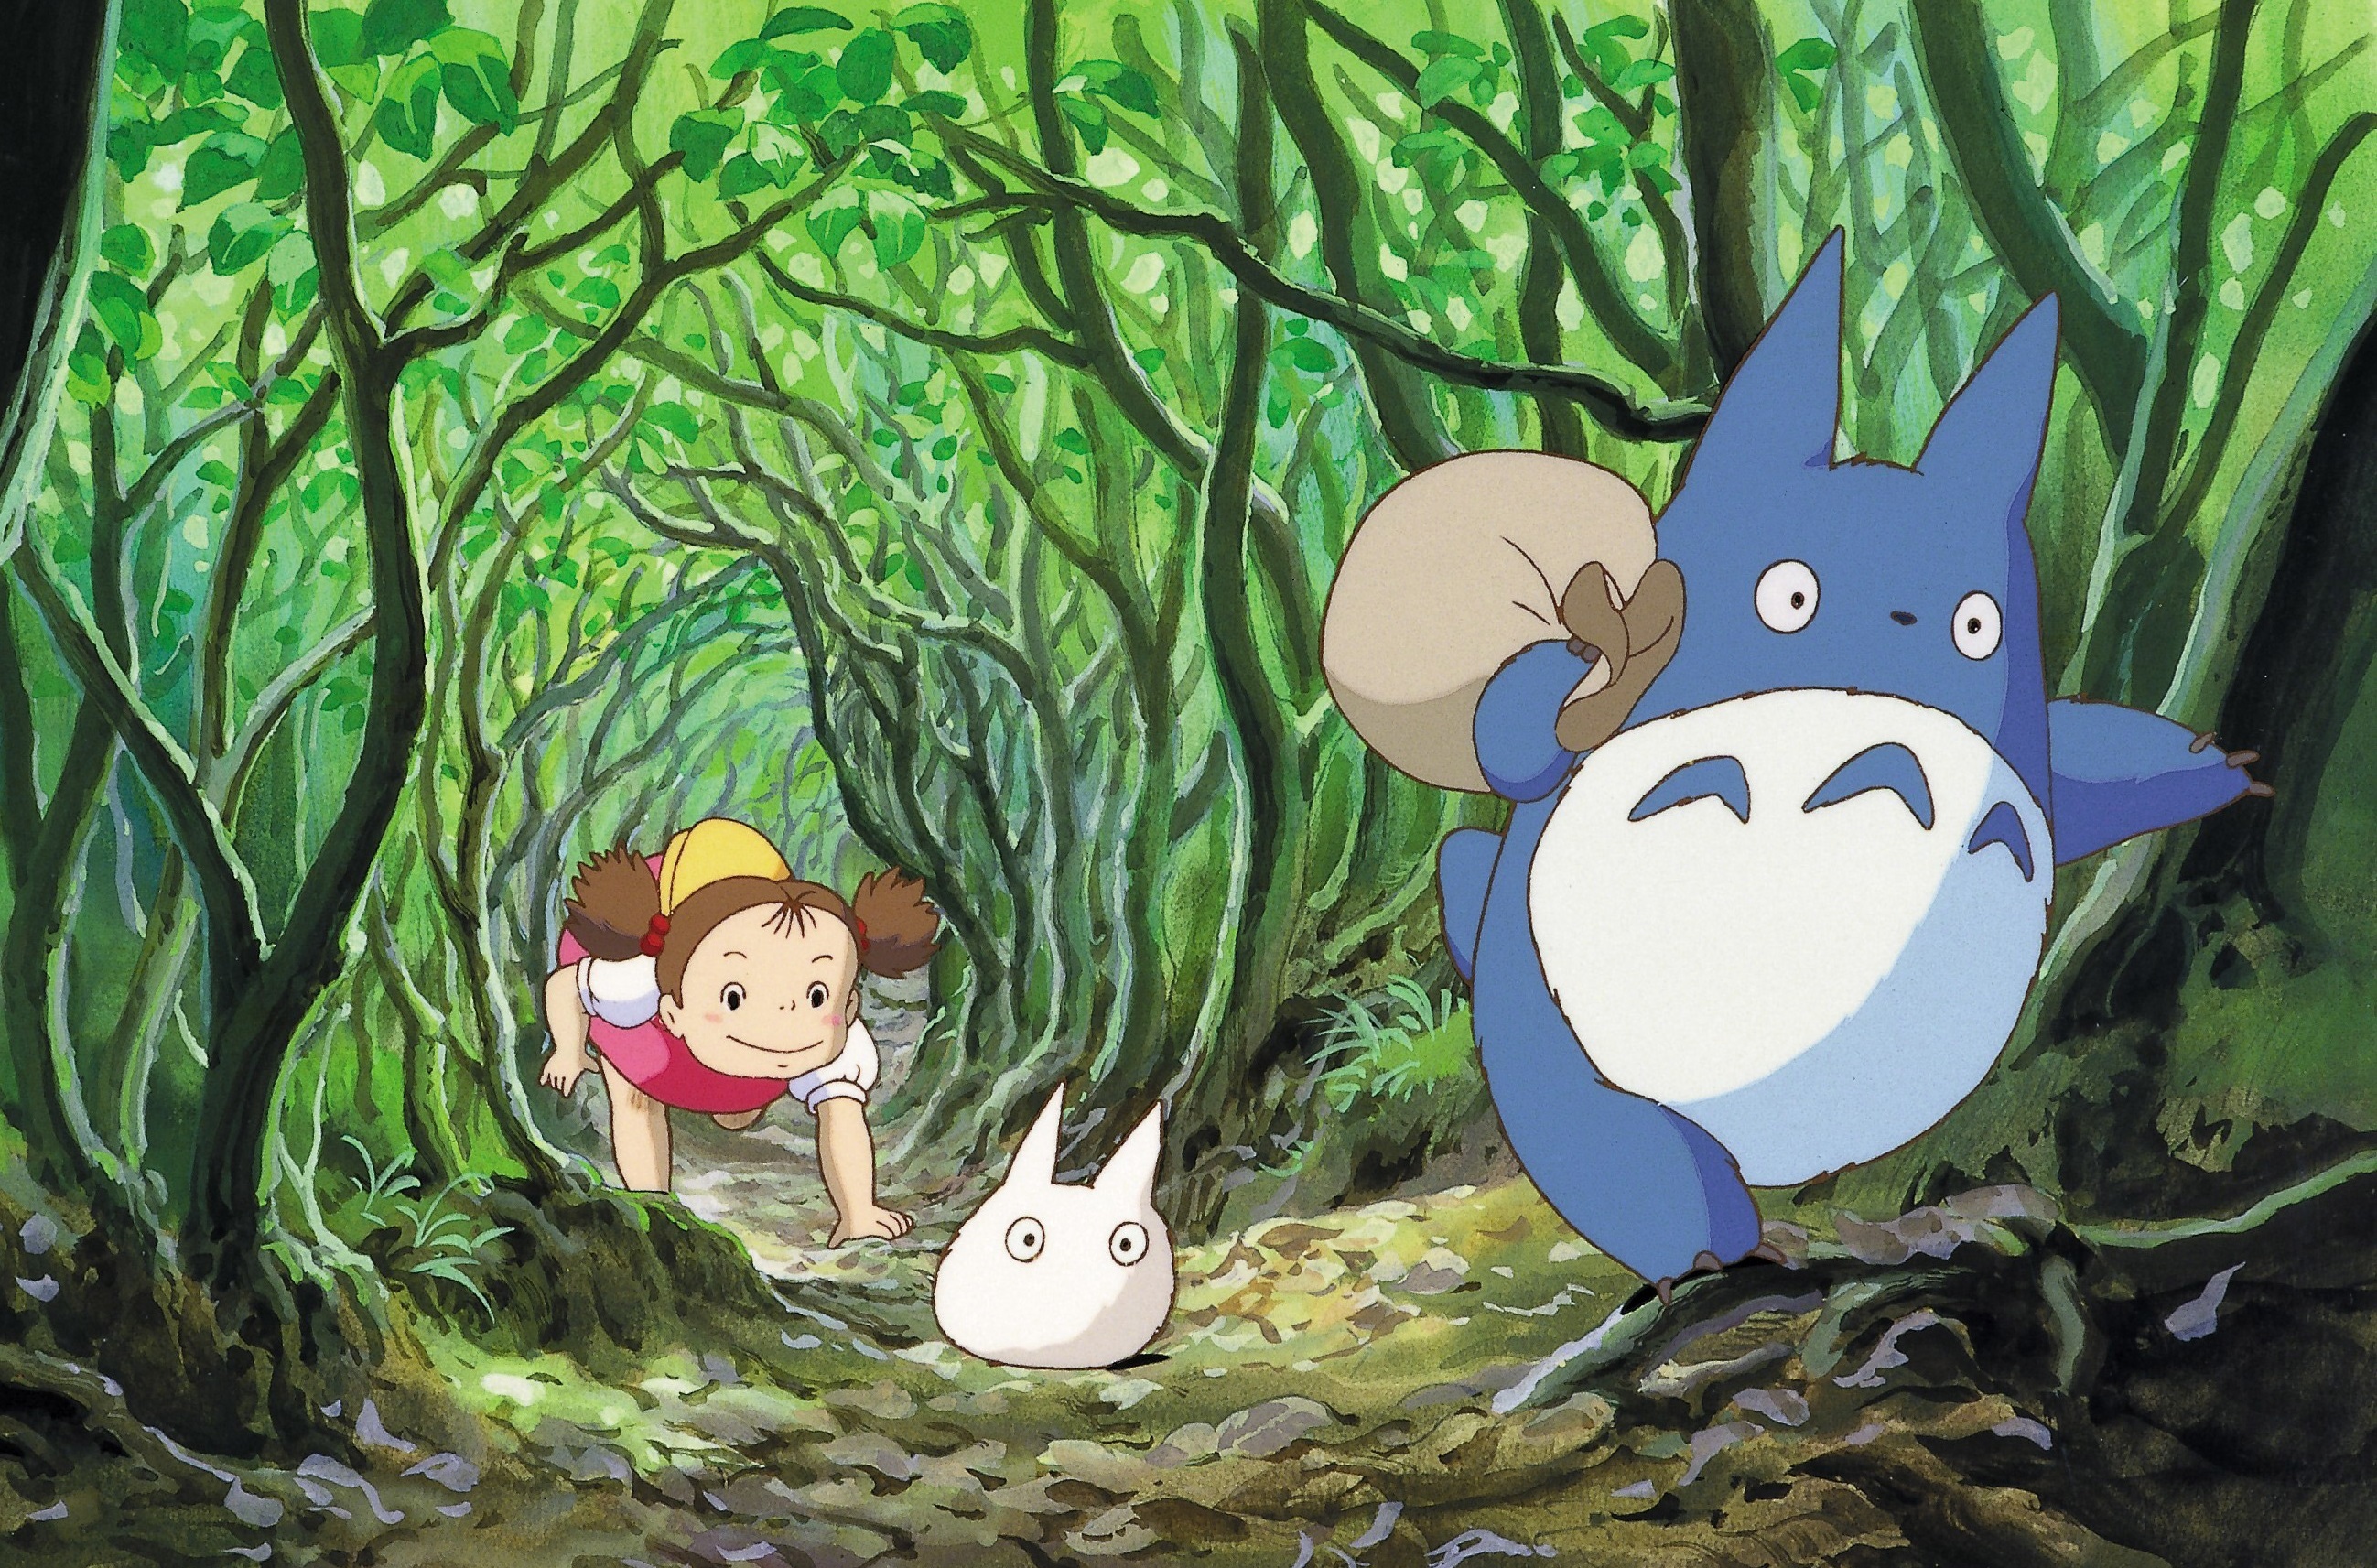 Seven Things I Learned While Writing A Book On Studio Ghibli's